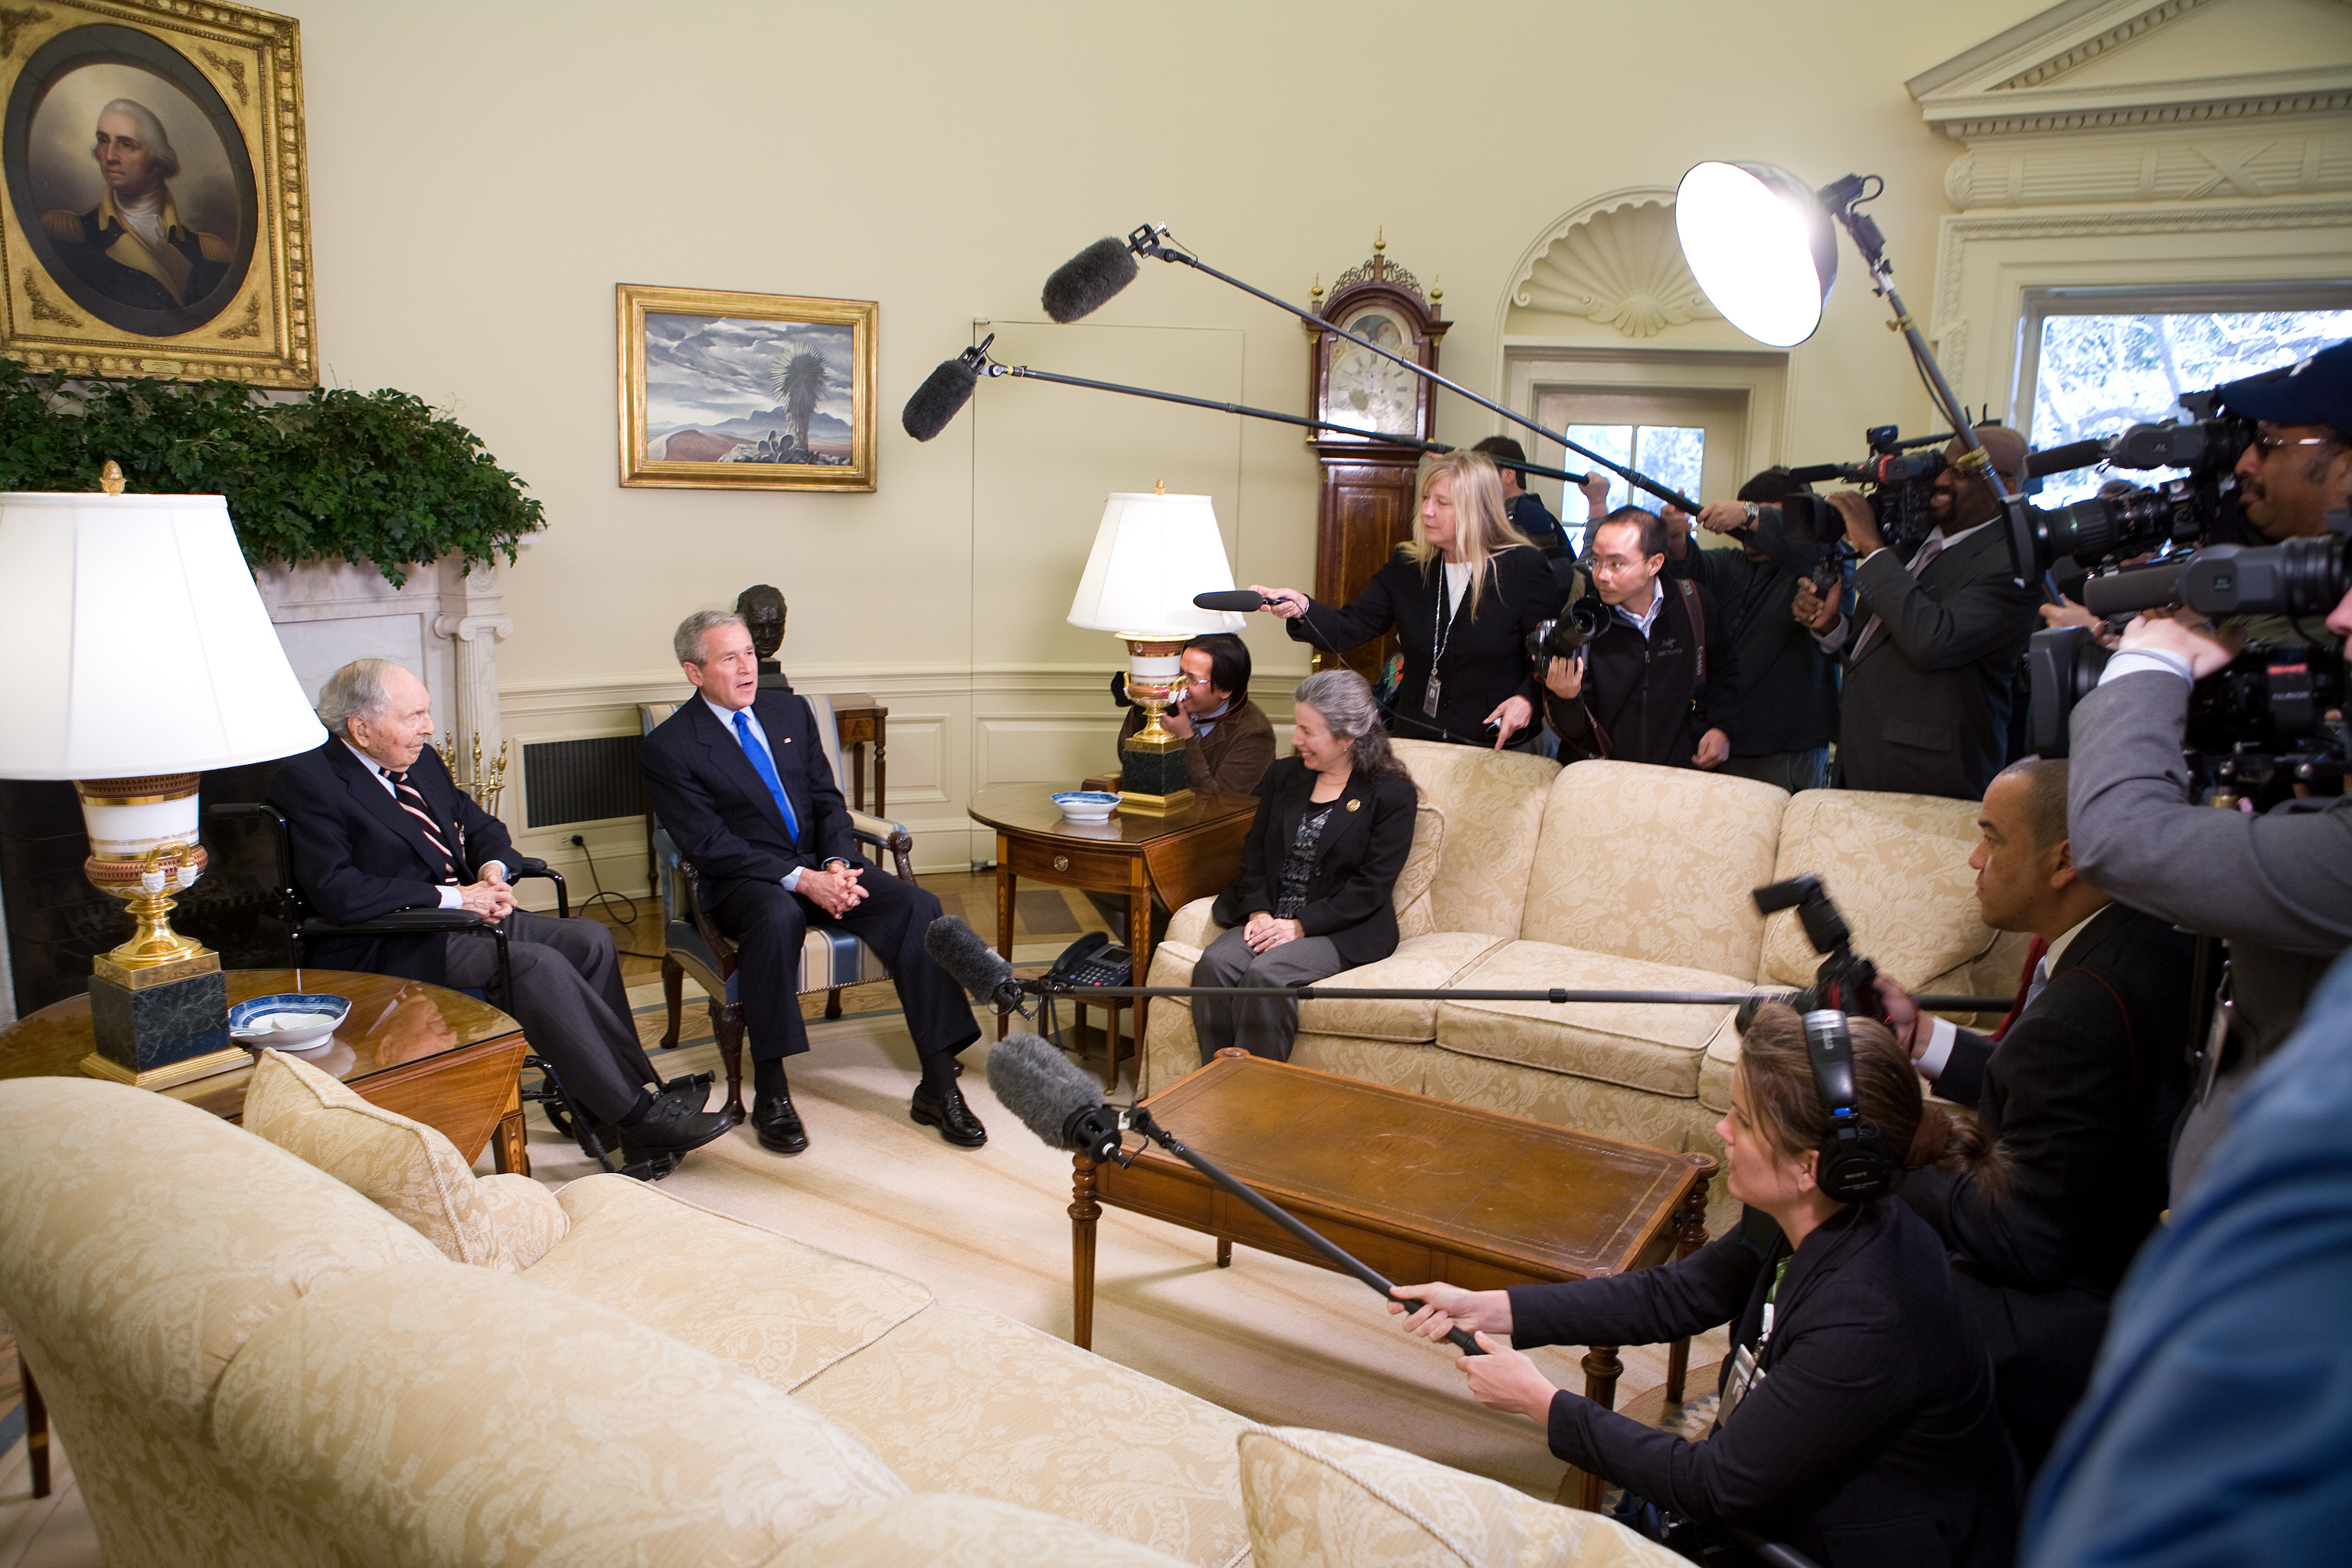 Frank Buckles visits with George Bush in the Oval Office 2008